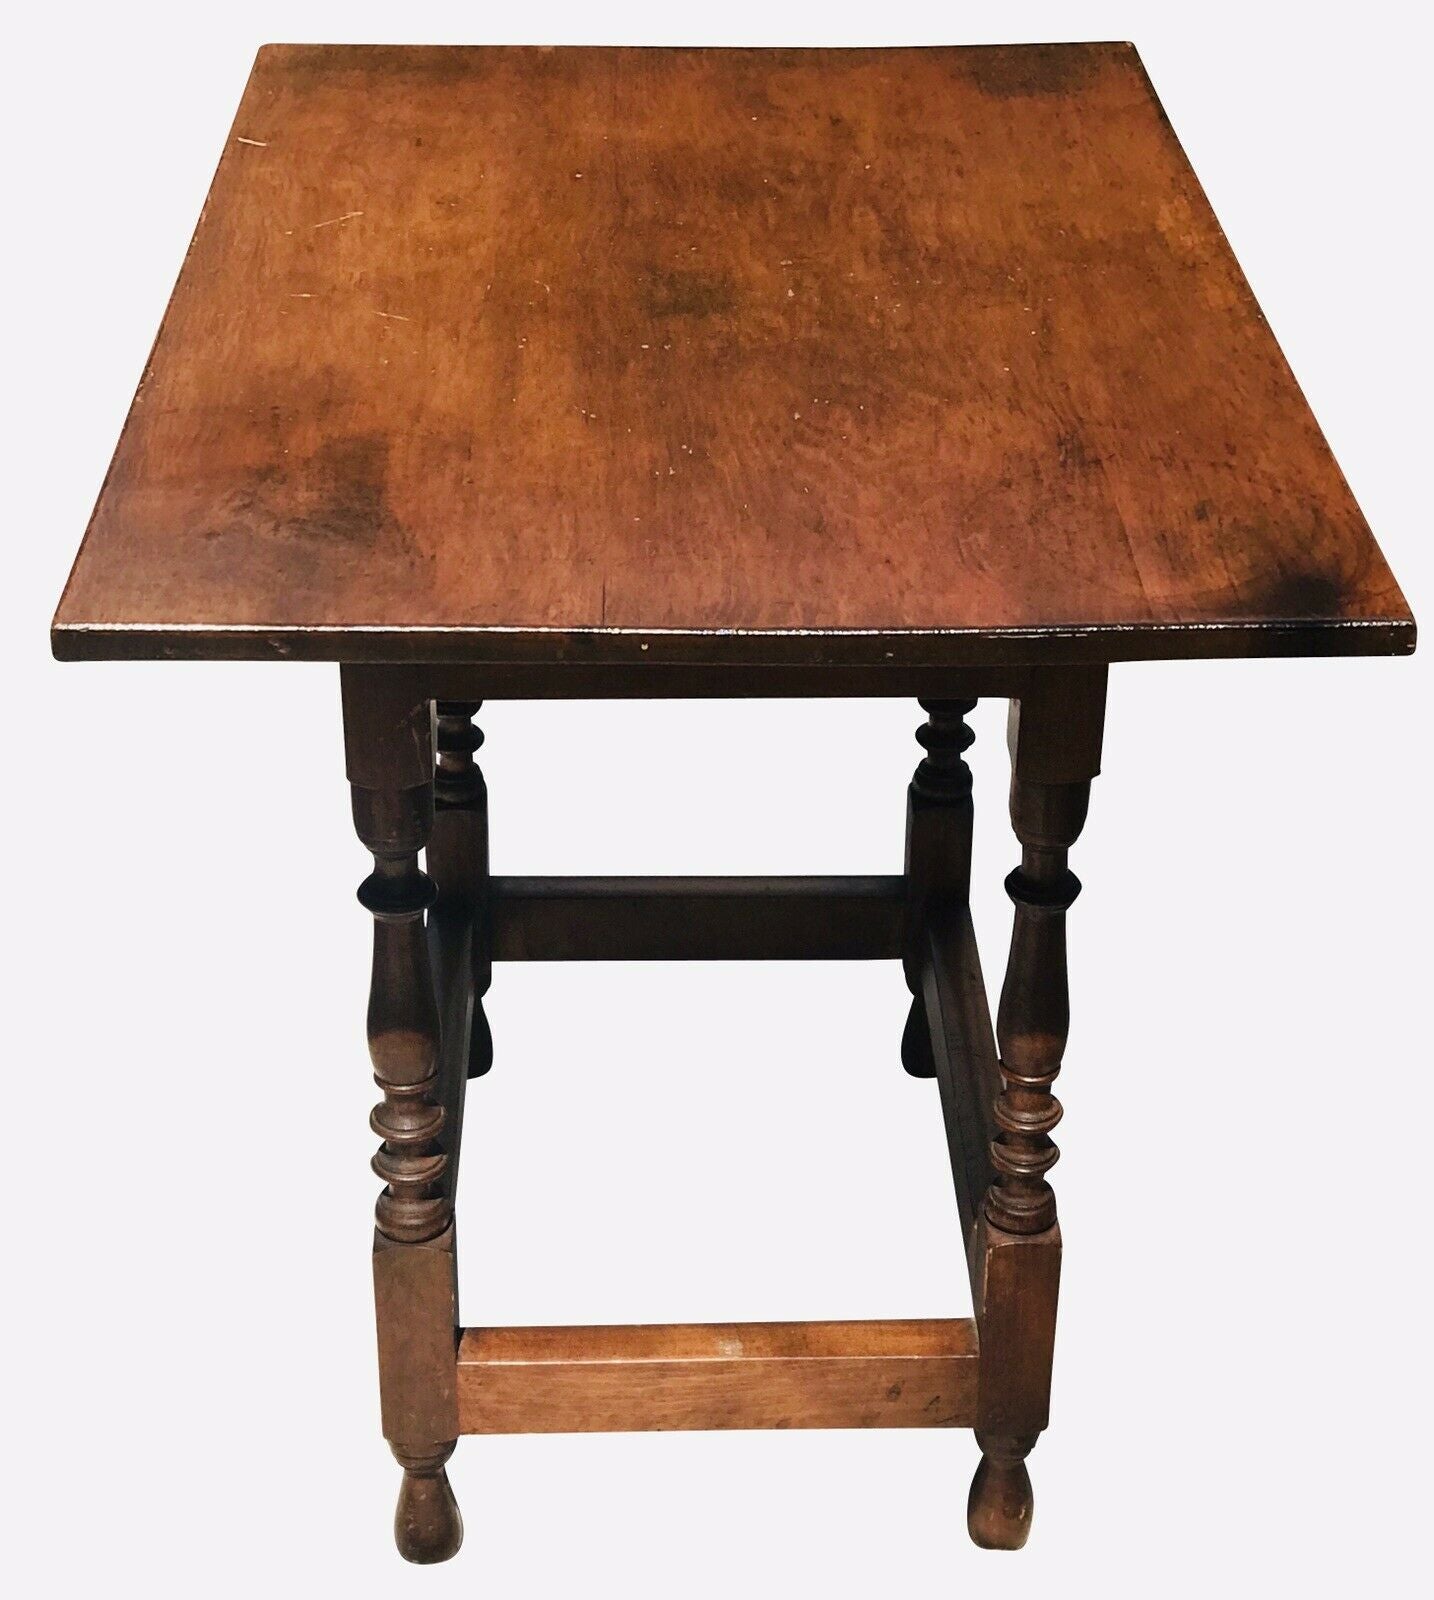 19TH C ANTIQUE WILLIAM & MARY STYLE NEW ENGLAND PINE TAVERN TABLE